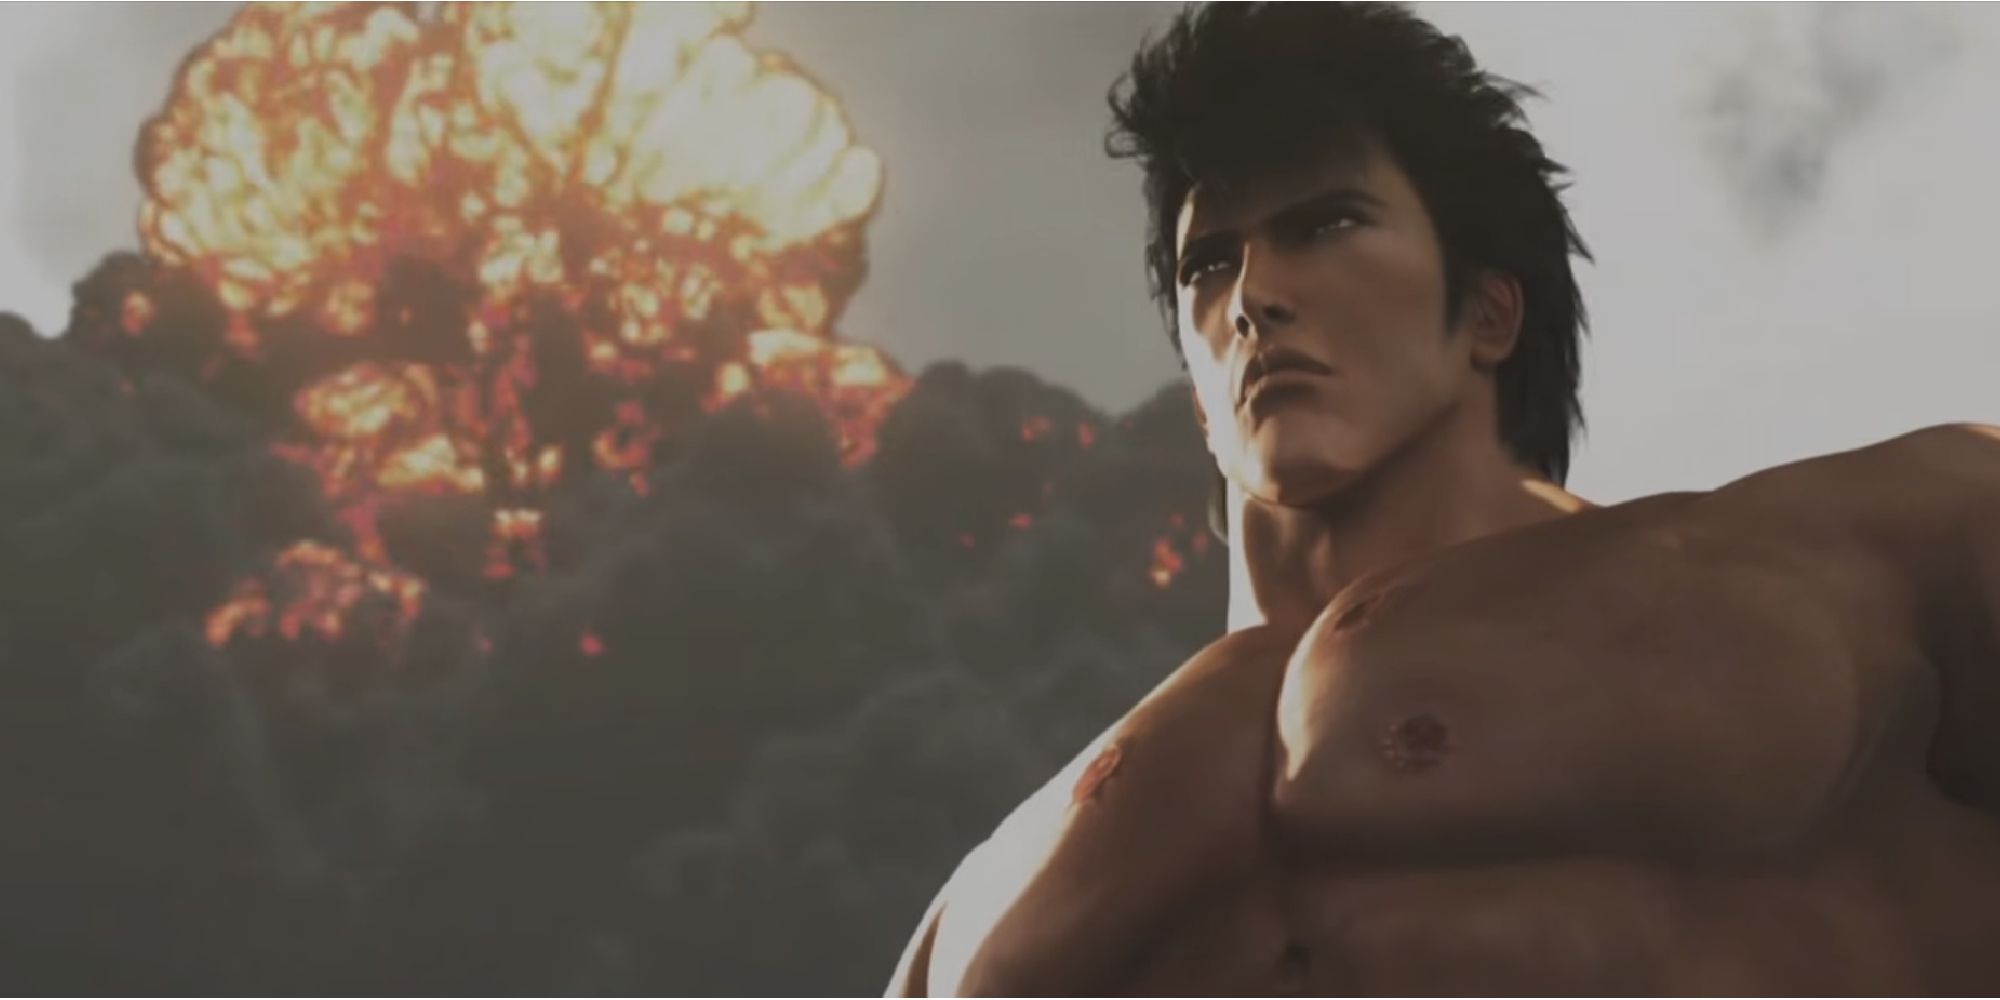 Fist of the North Star's Kenshiro stares at an unseen enemy as buildings explode behind him. 